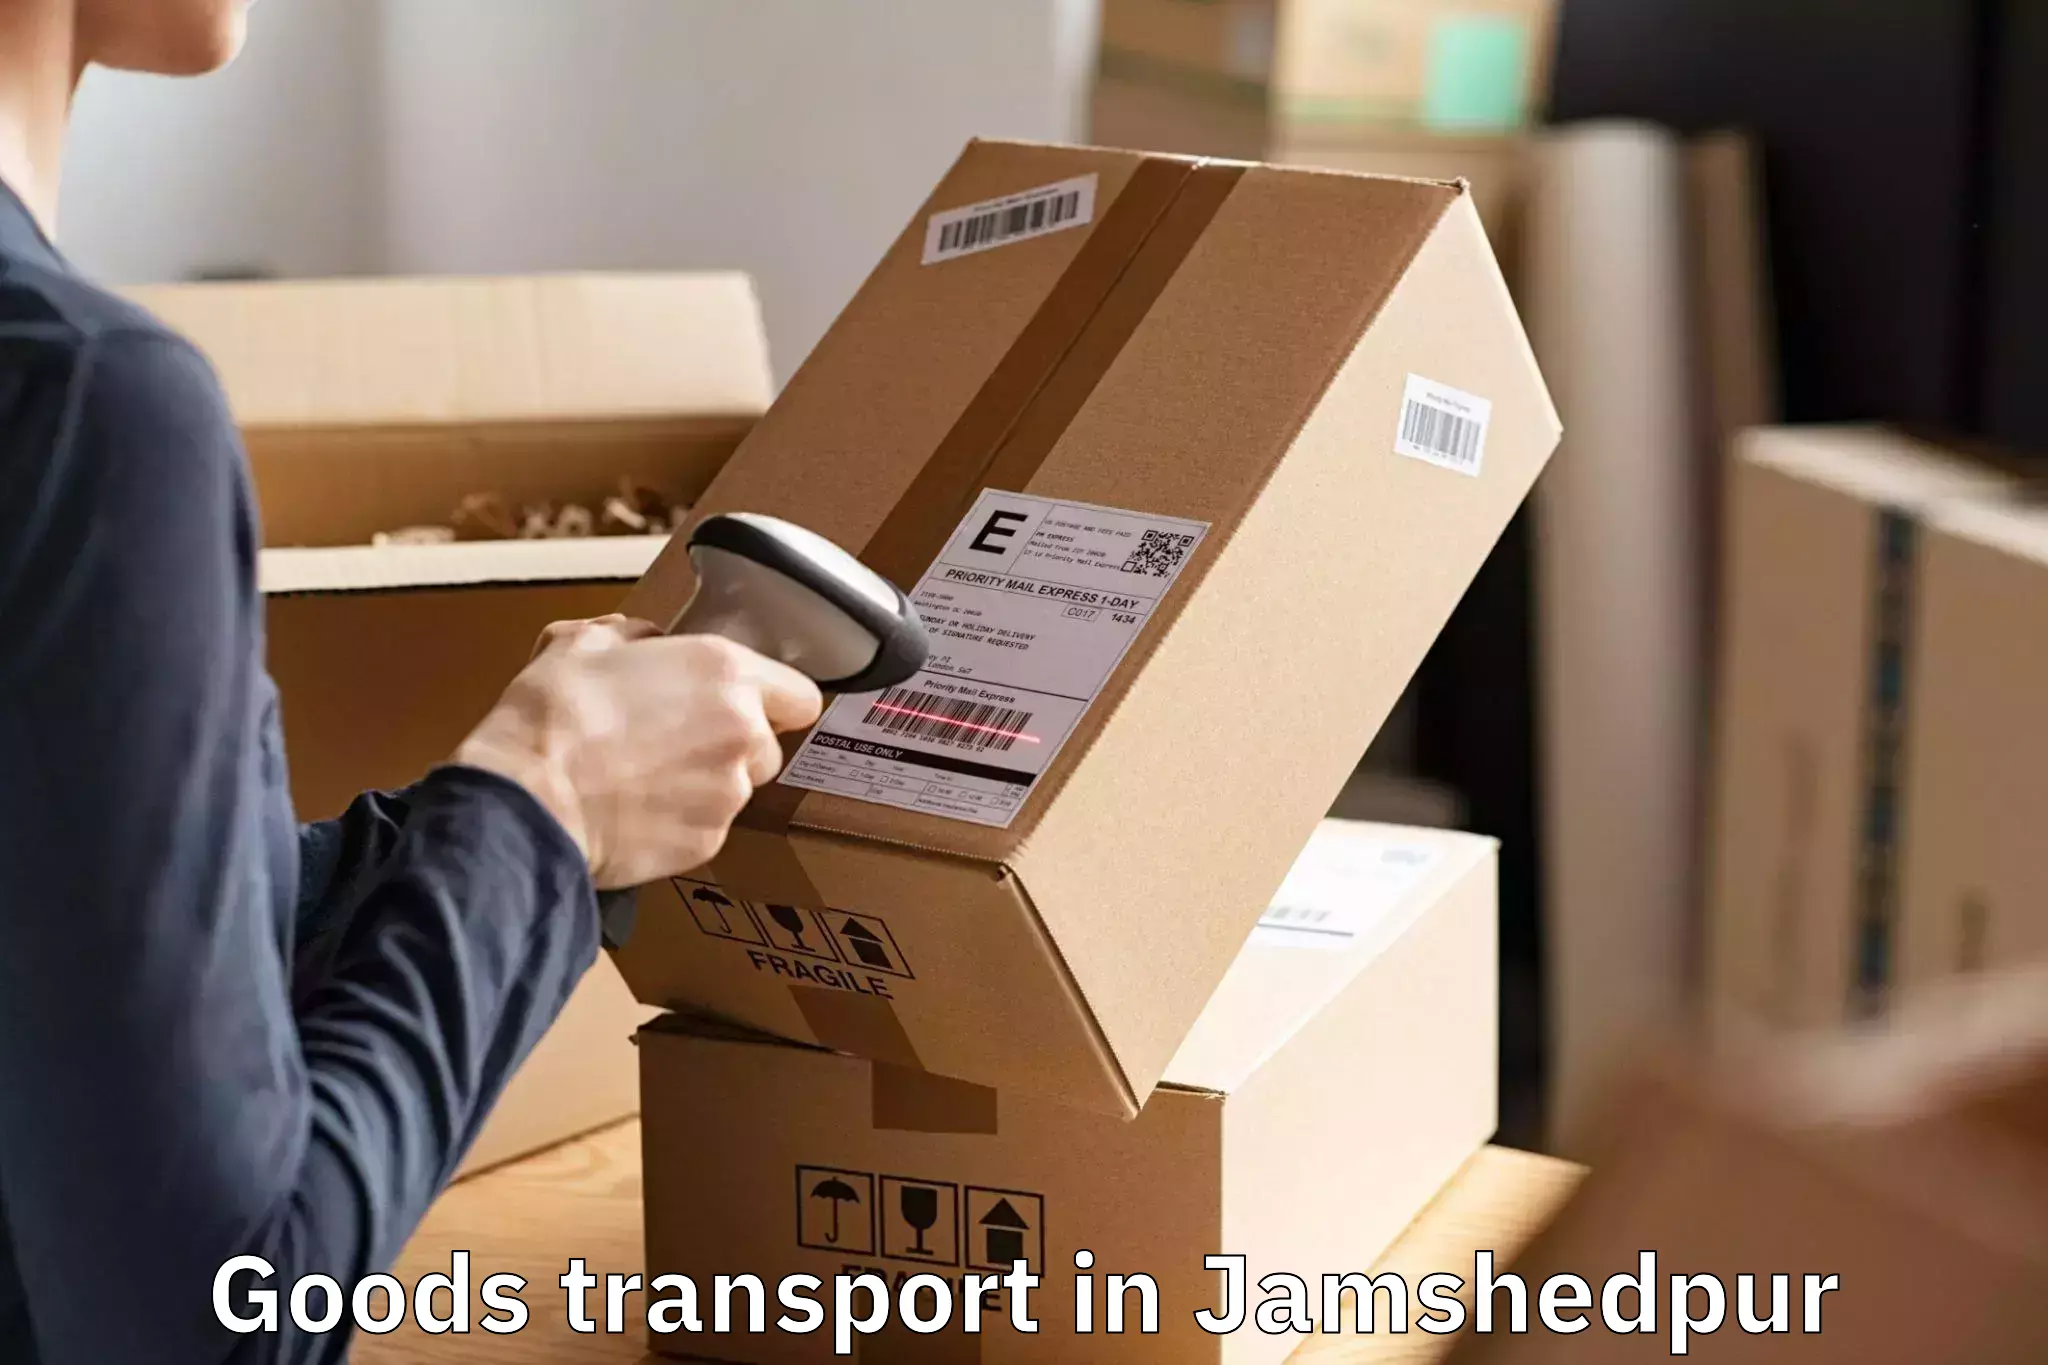 Trusted Goods Transport in Jamshedpur, Jharkhand (JH)